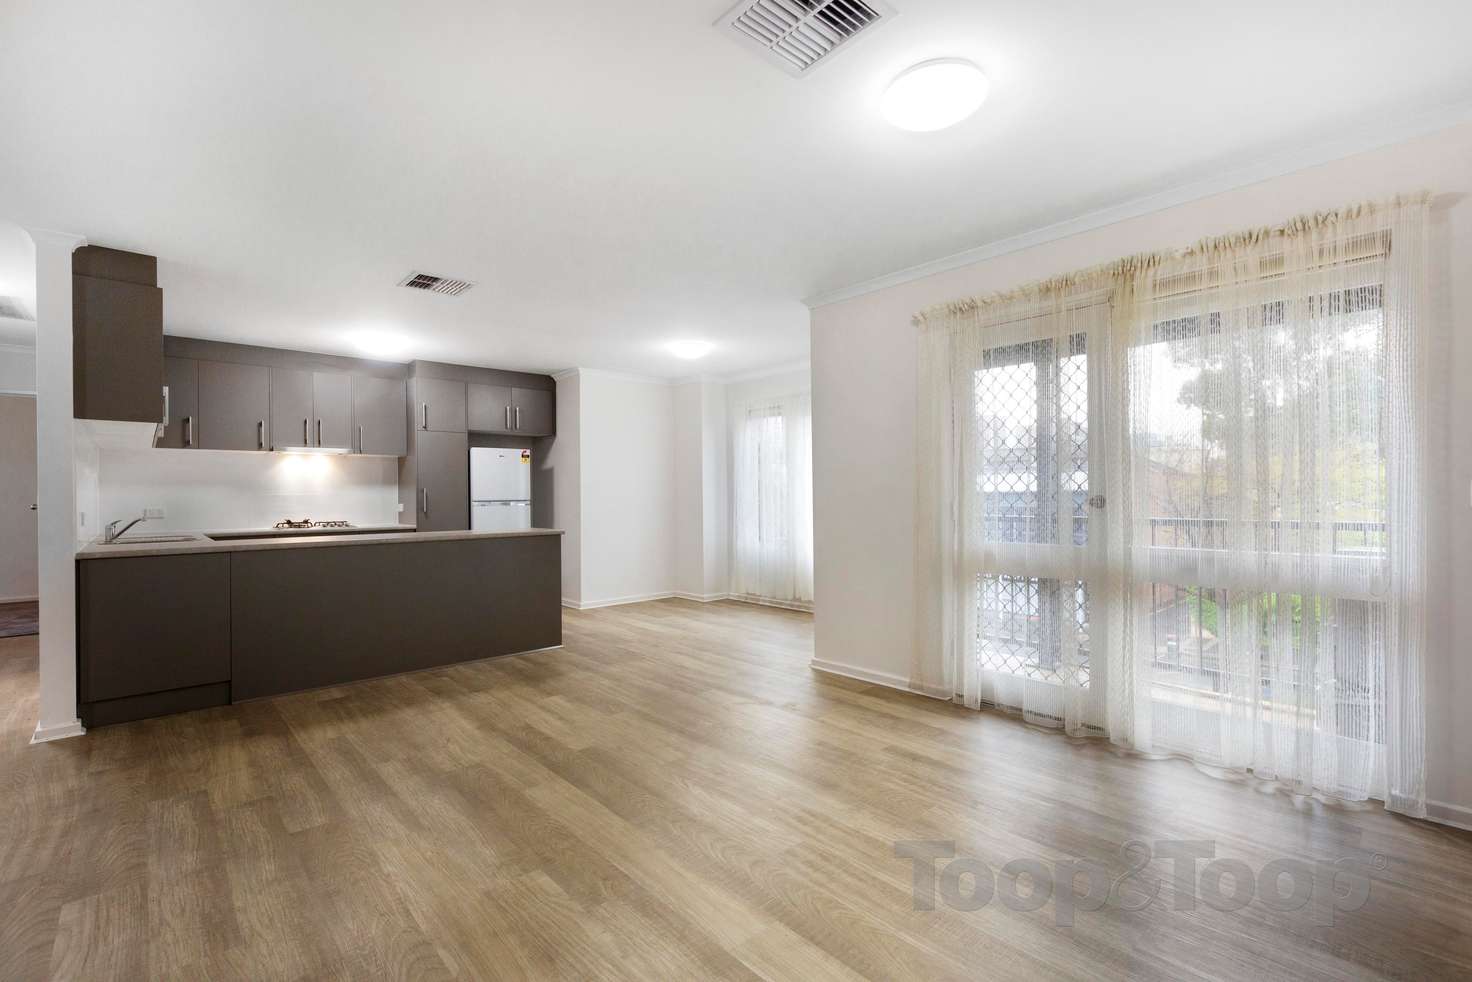 Main view of Homely apartment listing, 19/41 Hurtle Square, Adelaide SA 5000